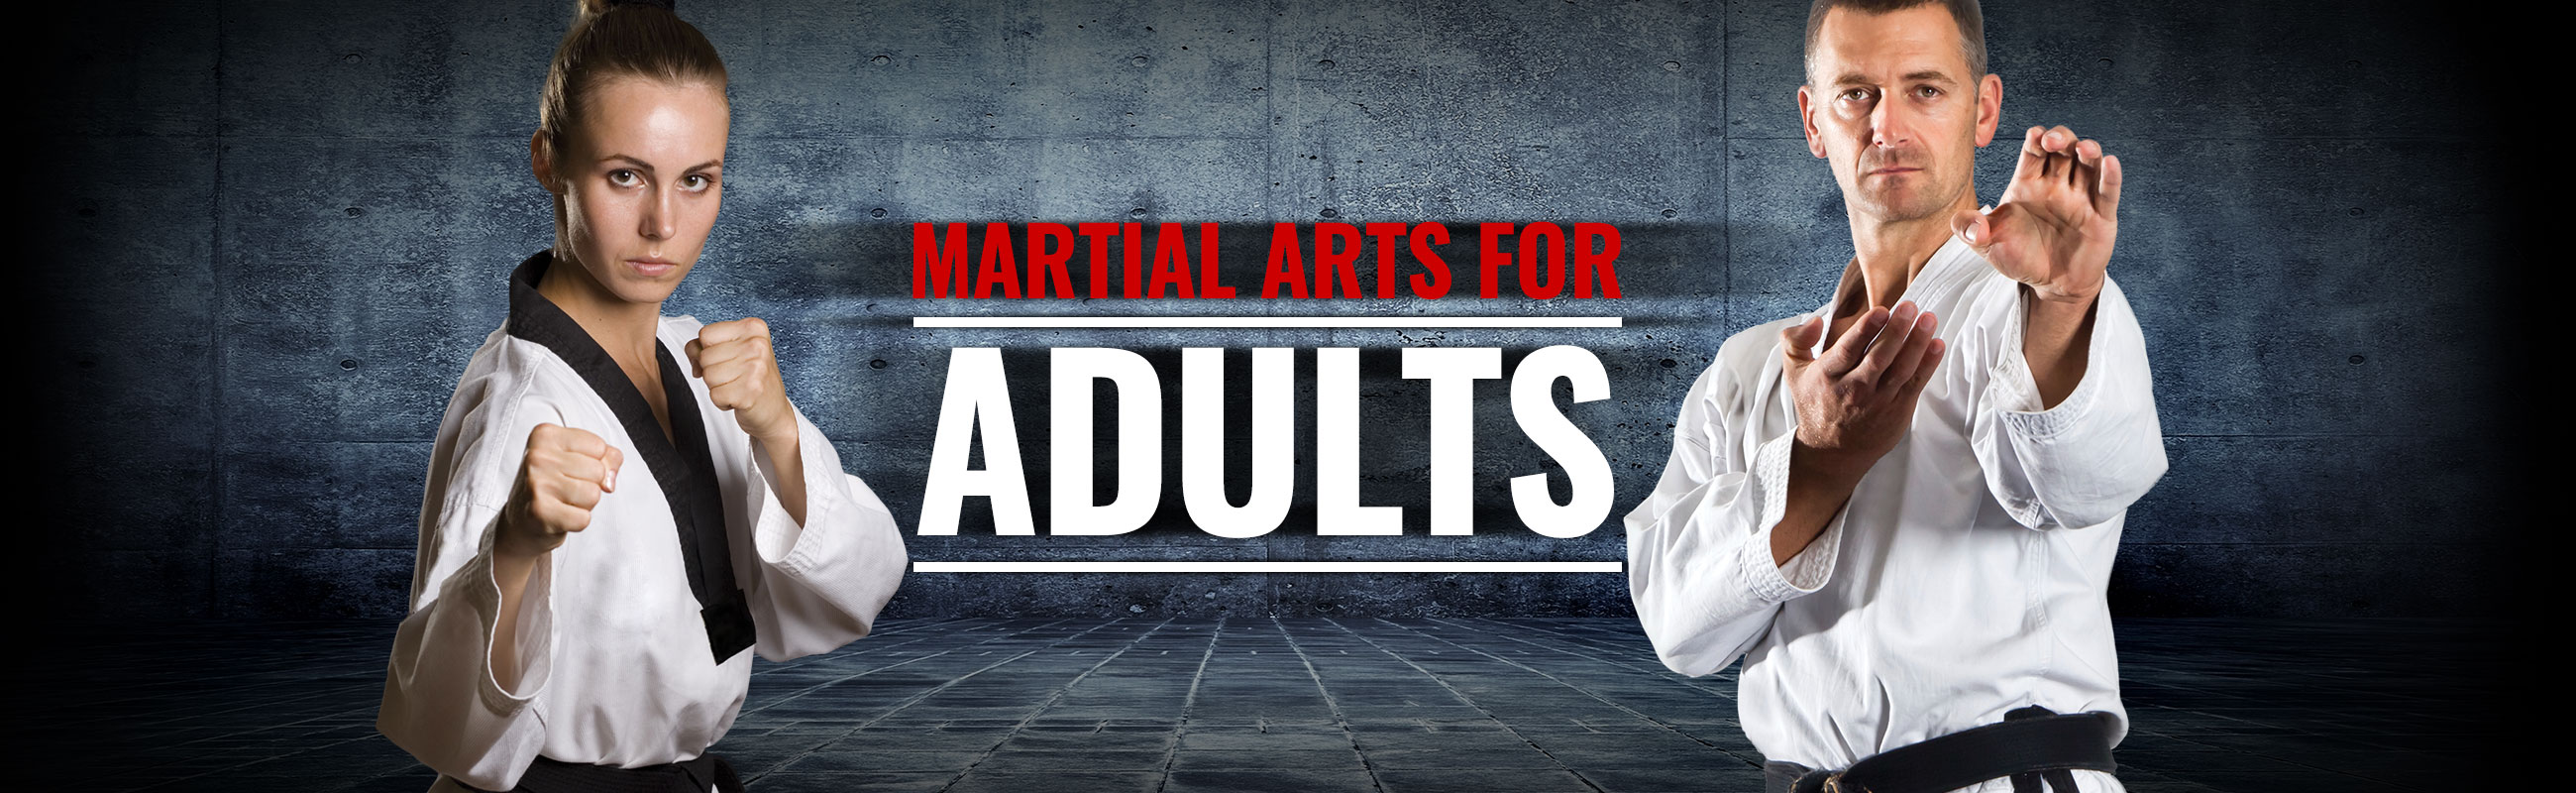 martial arts for adults